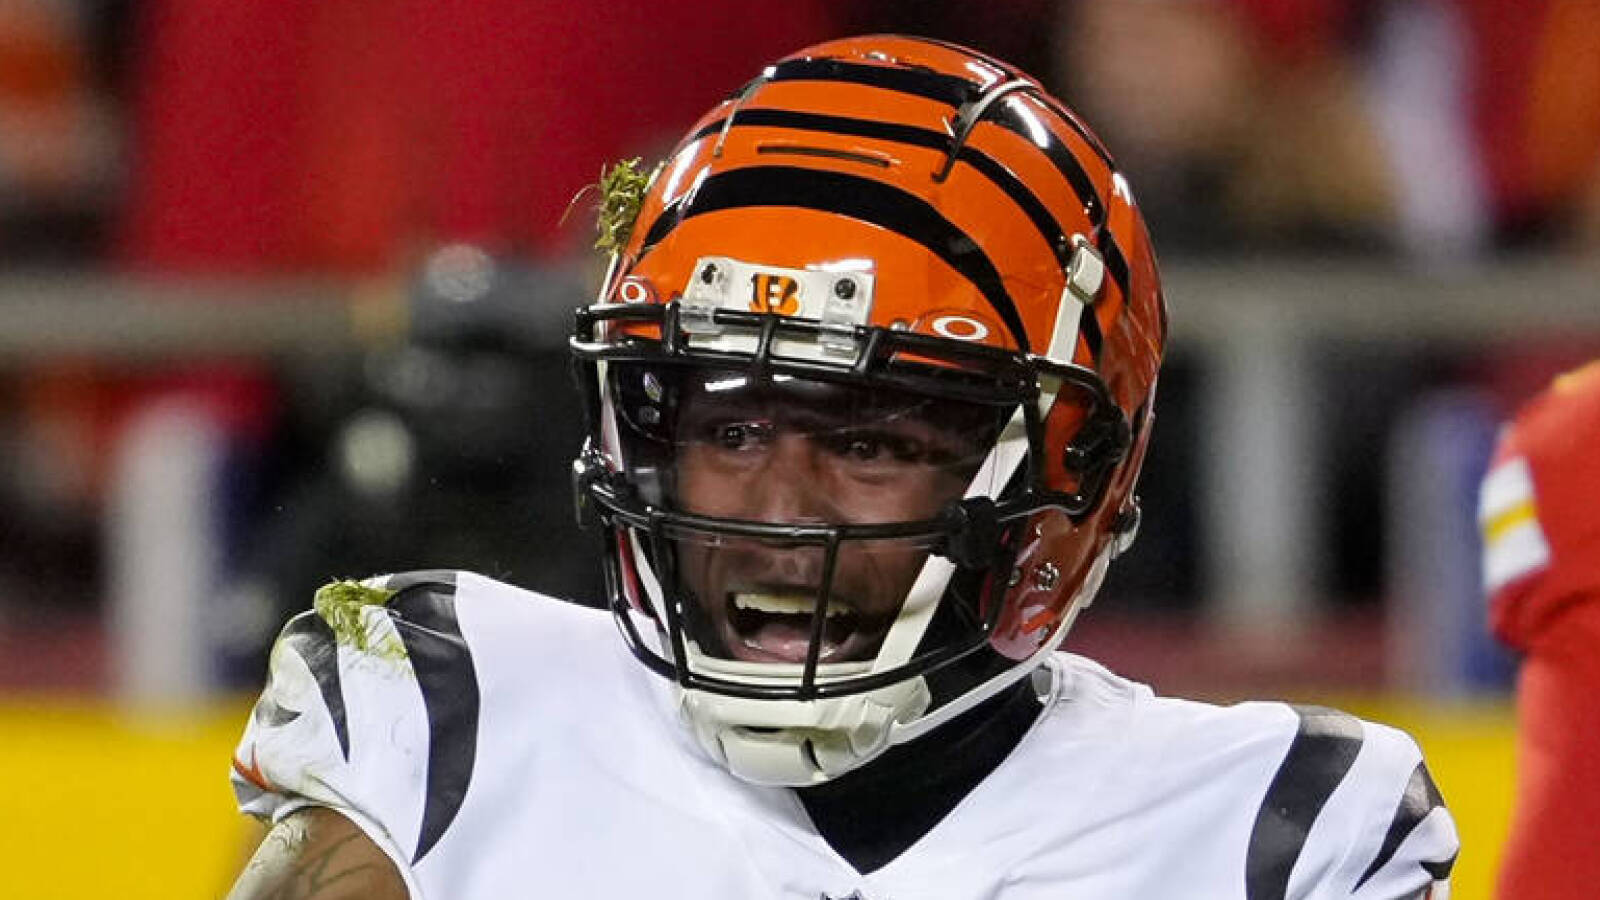 Bengals star WR not expected to sign franchise tender before OTAs